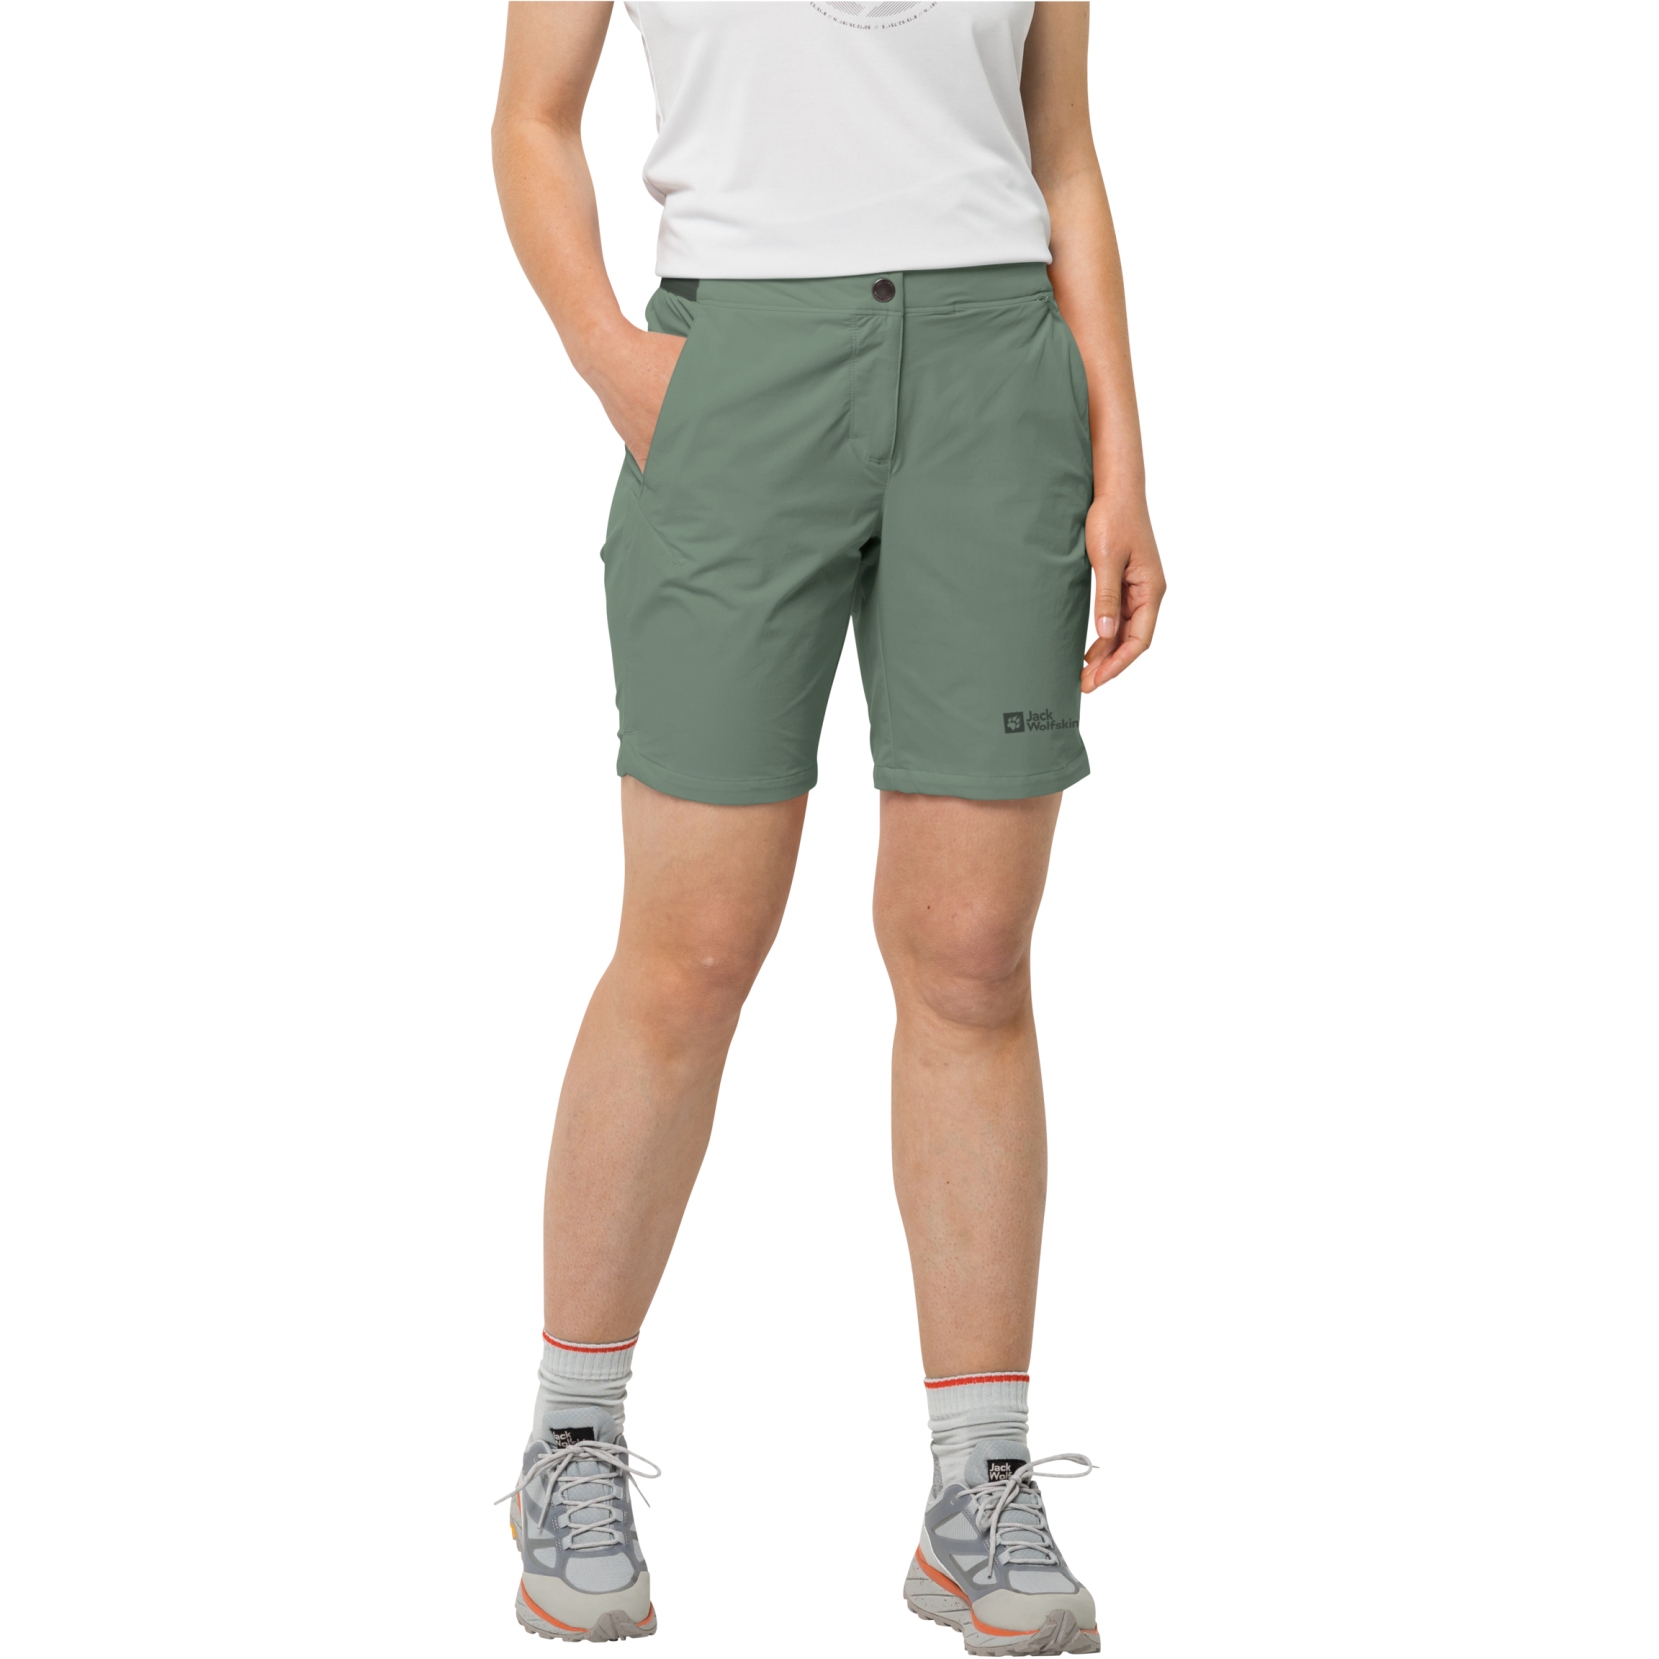 Picture of Jack Wolfskin Hilltop Trail Shorts Women - picnic green